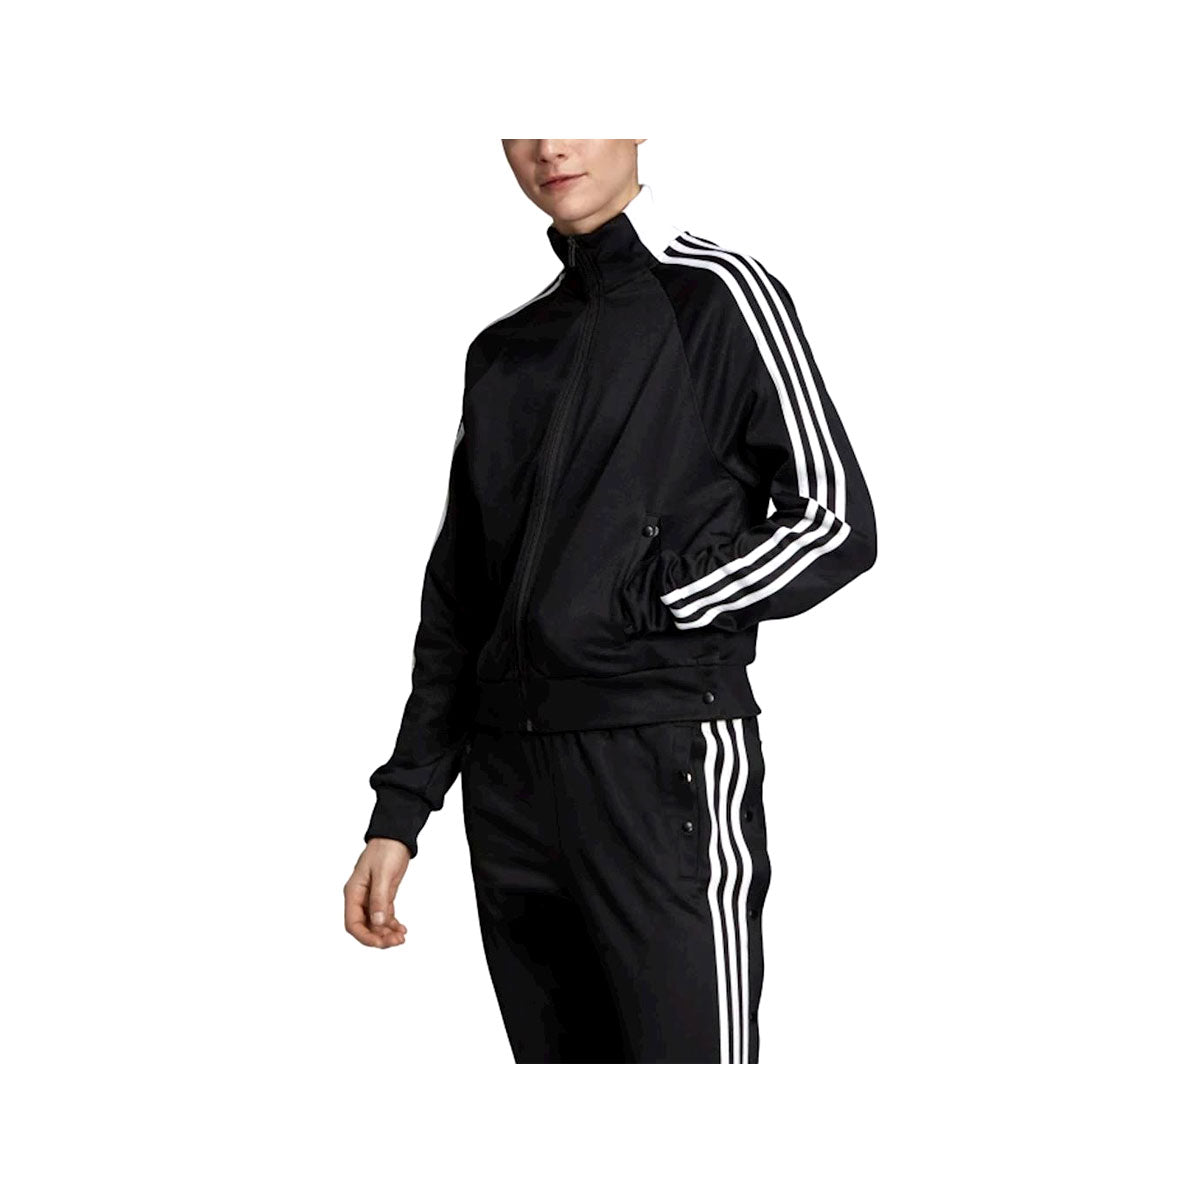 Adidas Women's ID 3-Stripes Snap Track Top